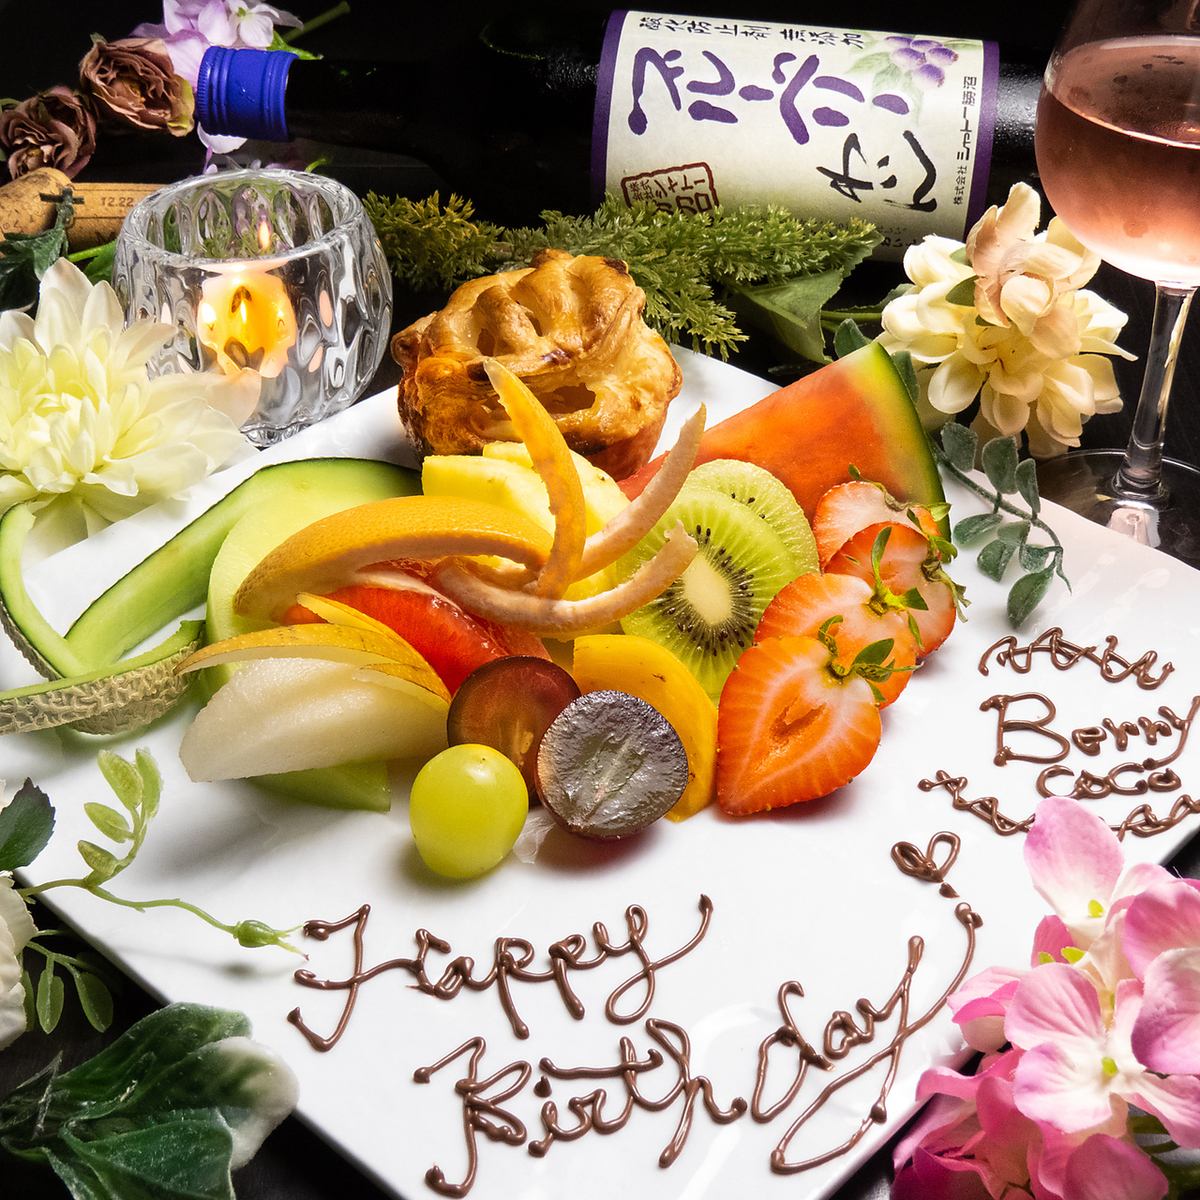 We can prepare a plate with a message ◎ Please use it to create a celebration ♪